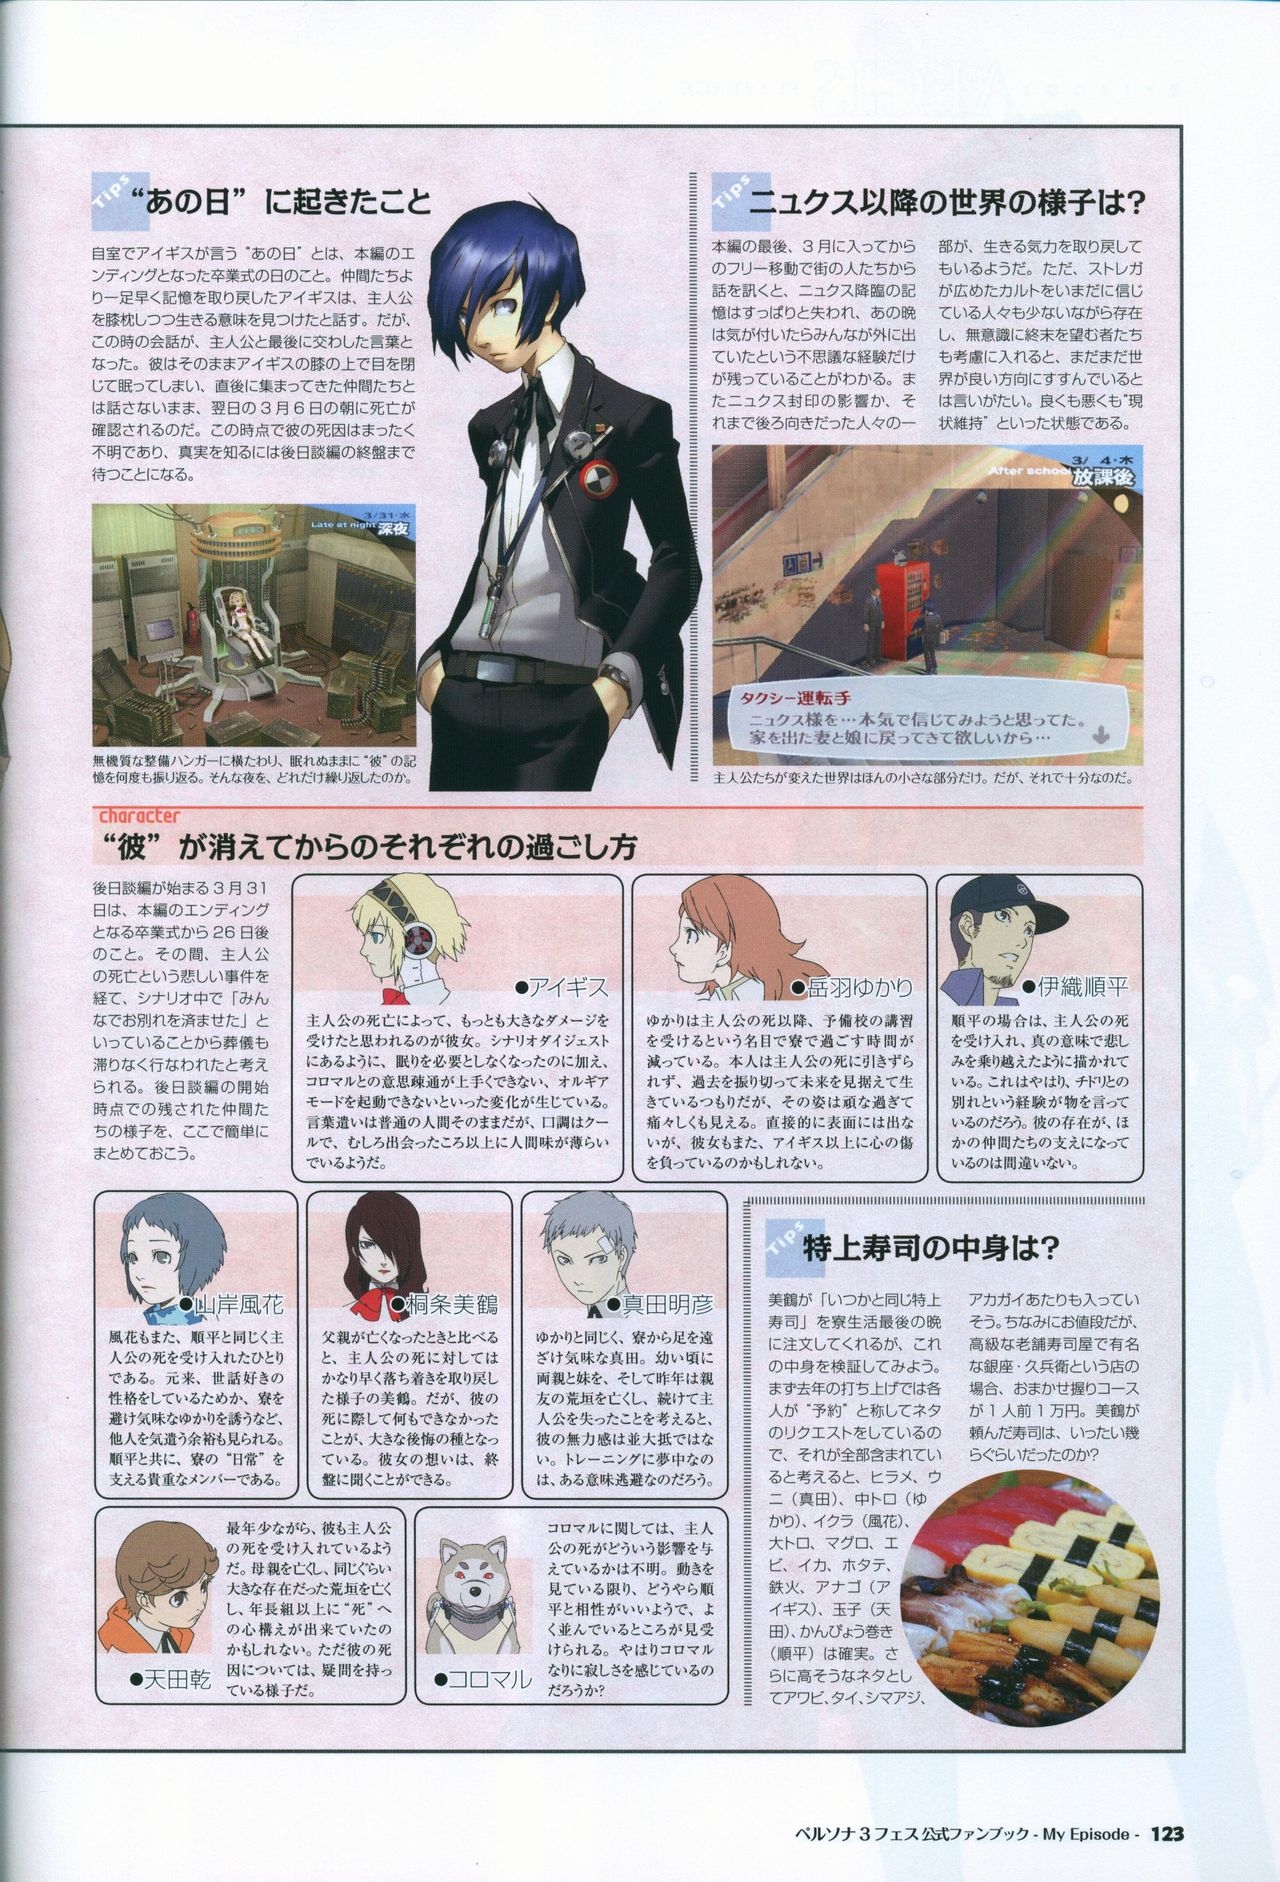 Persona 3 Fes Official Fan Book -My Episode- 124